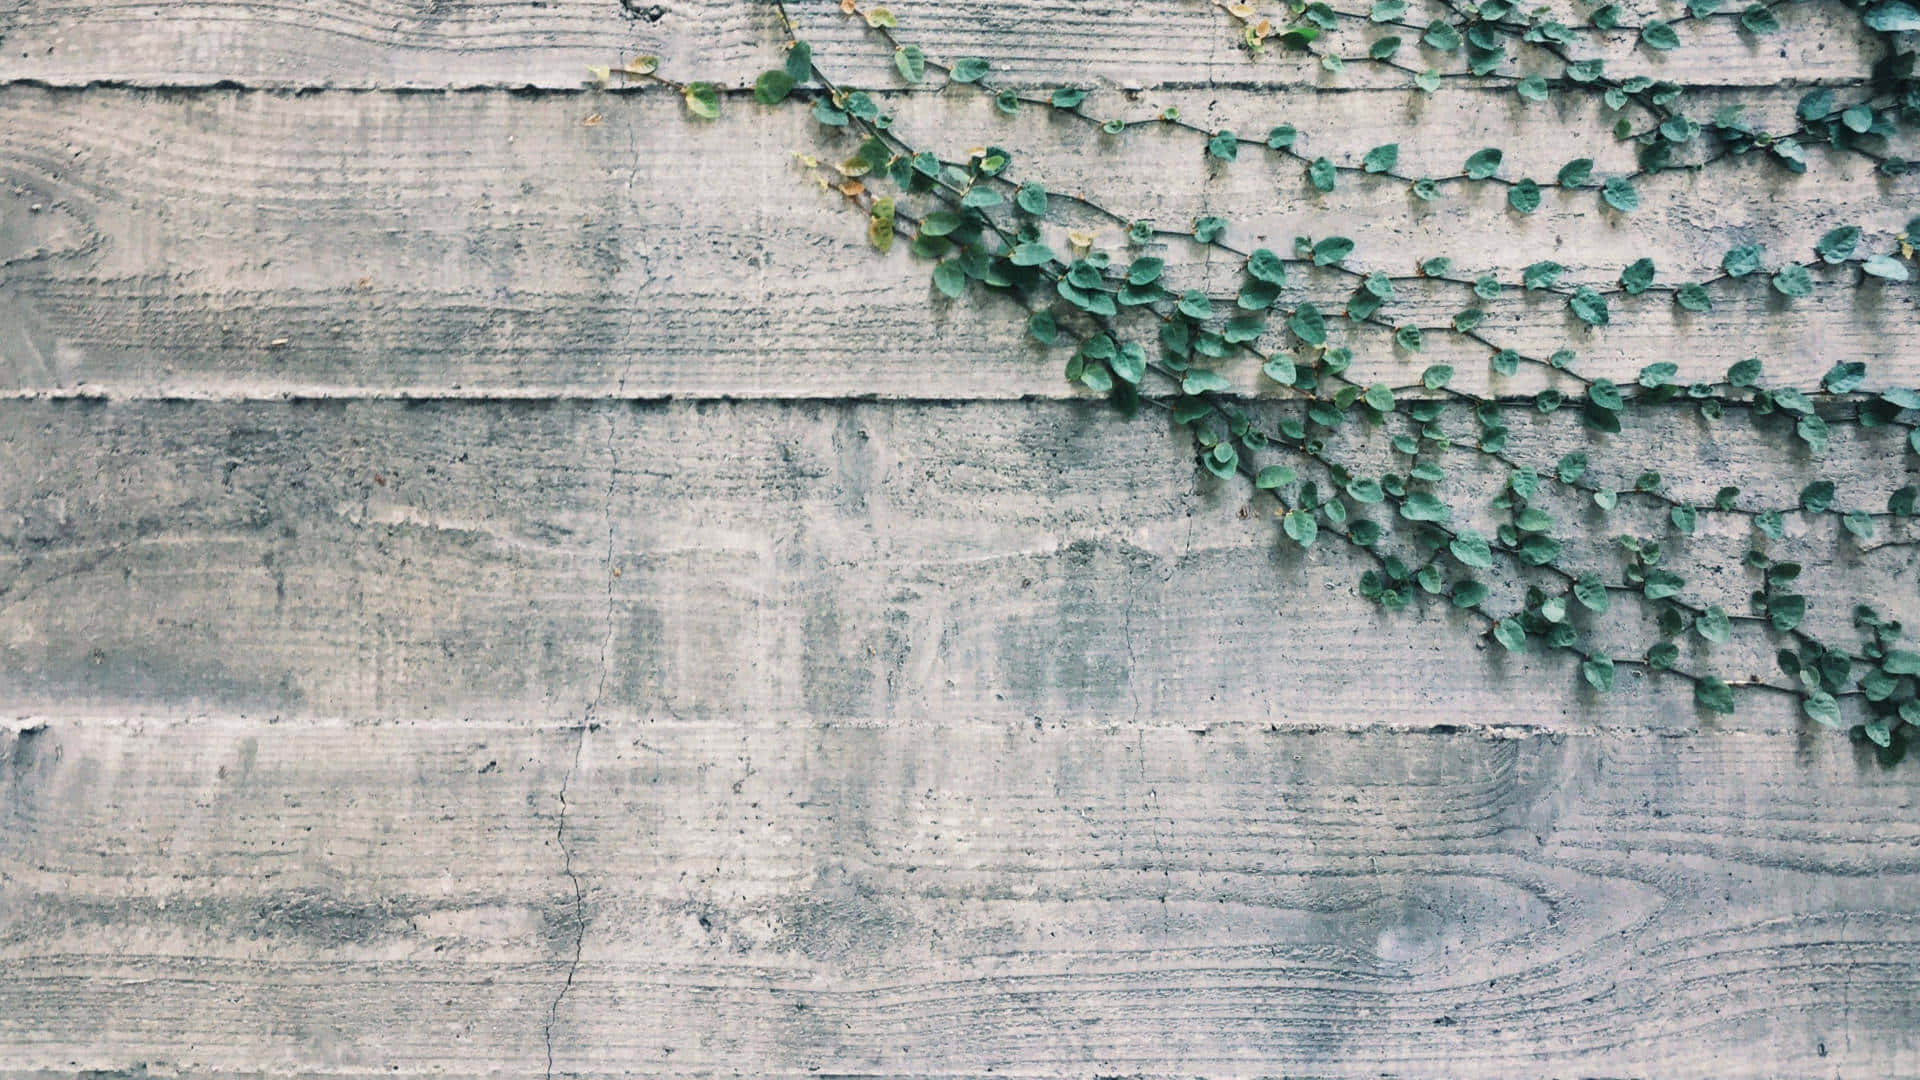 ivy growing on a wooden wall